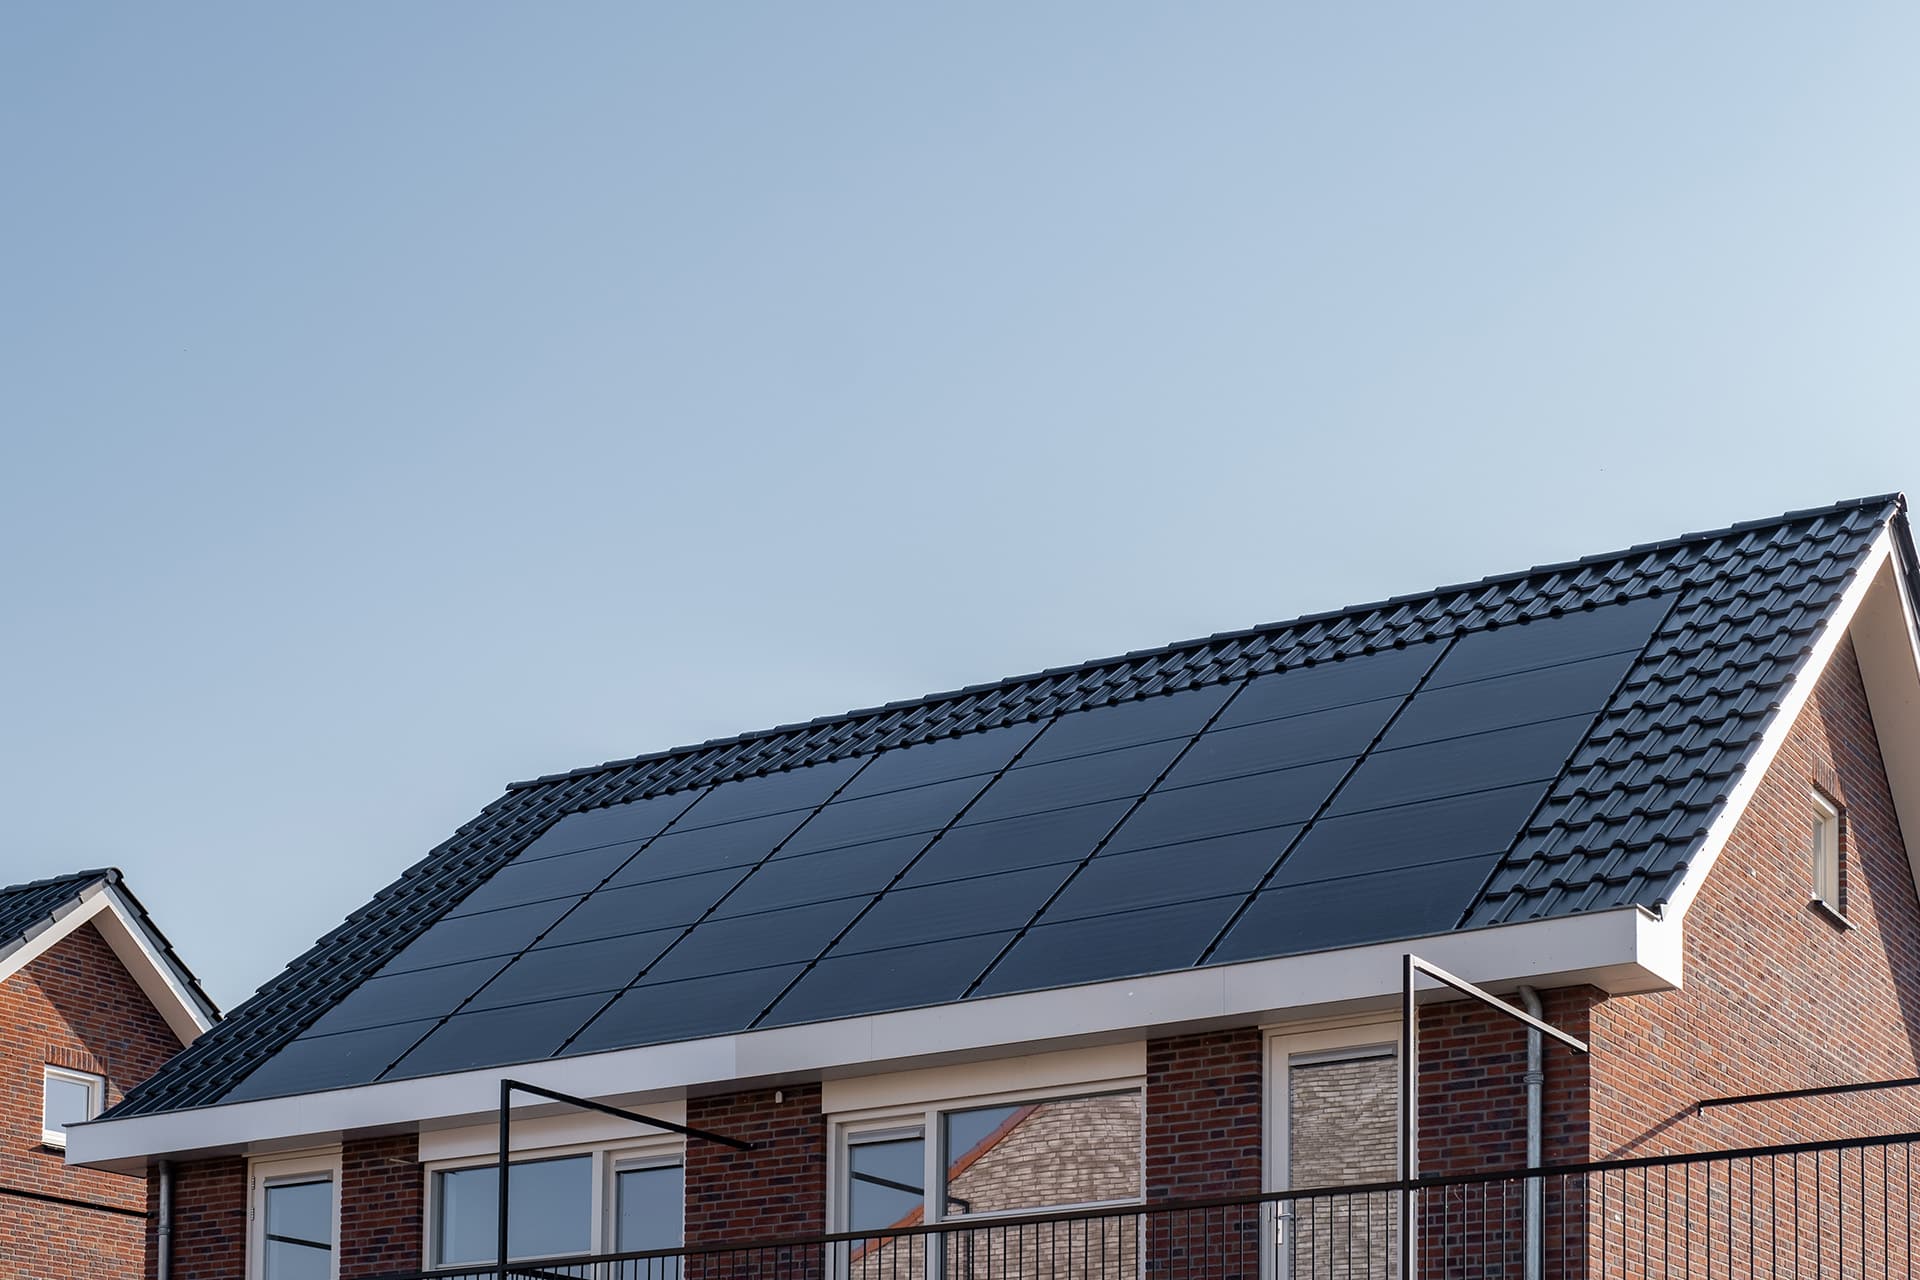 sleek black solar panel system on roof of brown house with a clear blue sky background